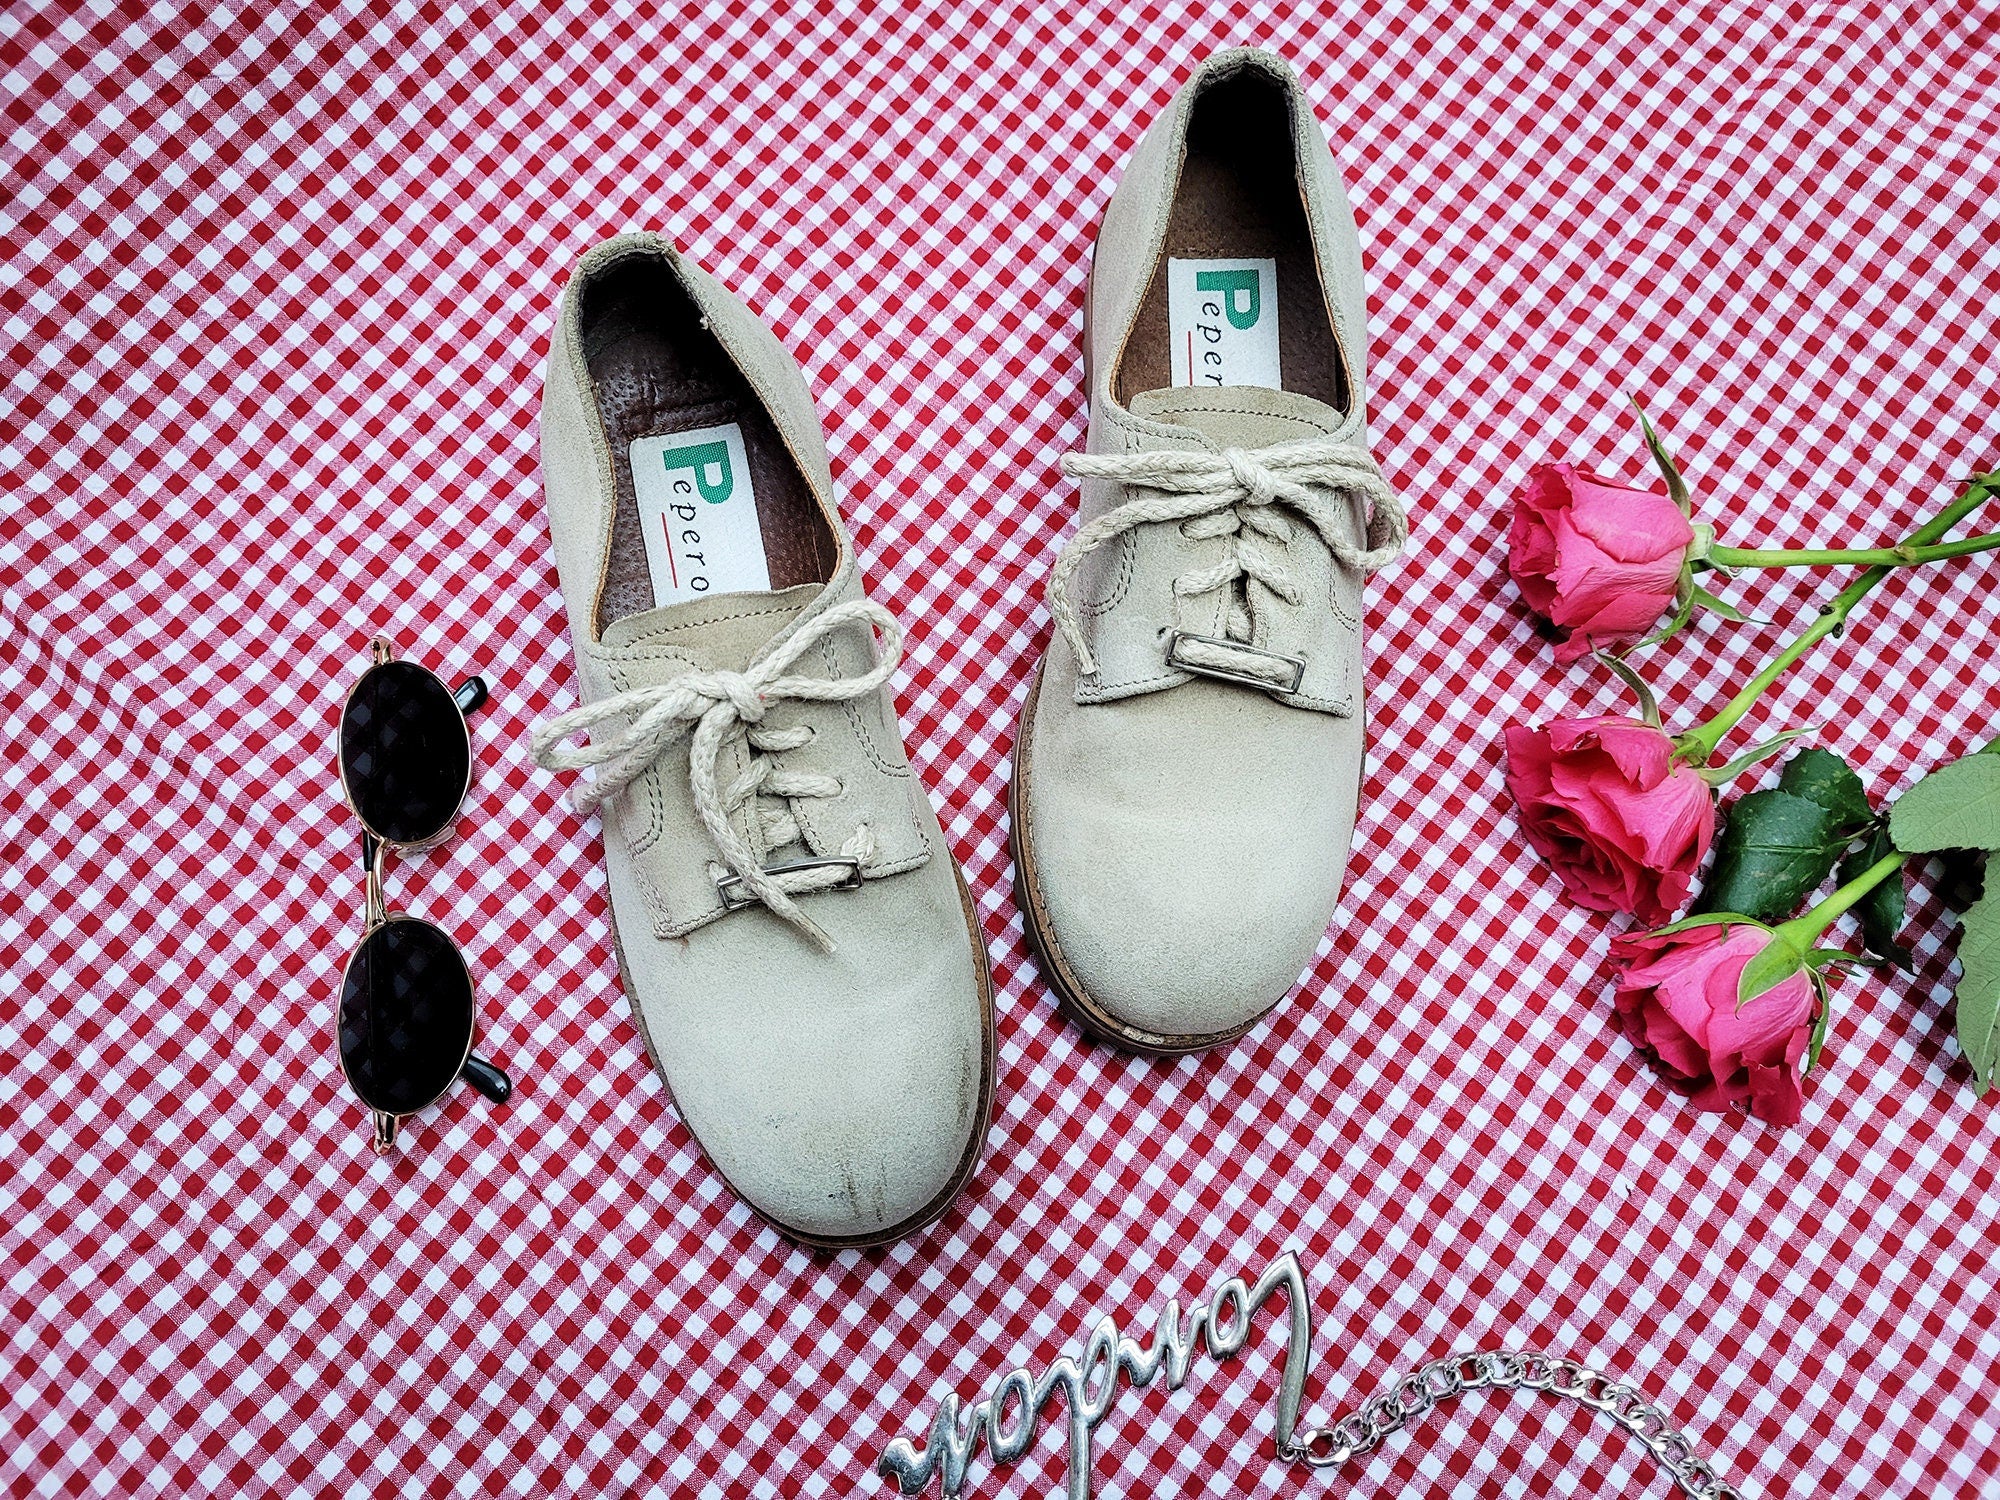 Vintage 90s beige suede chunky tie up shoes